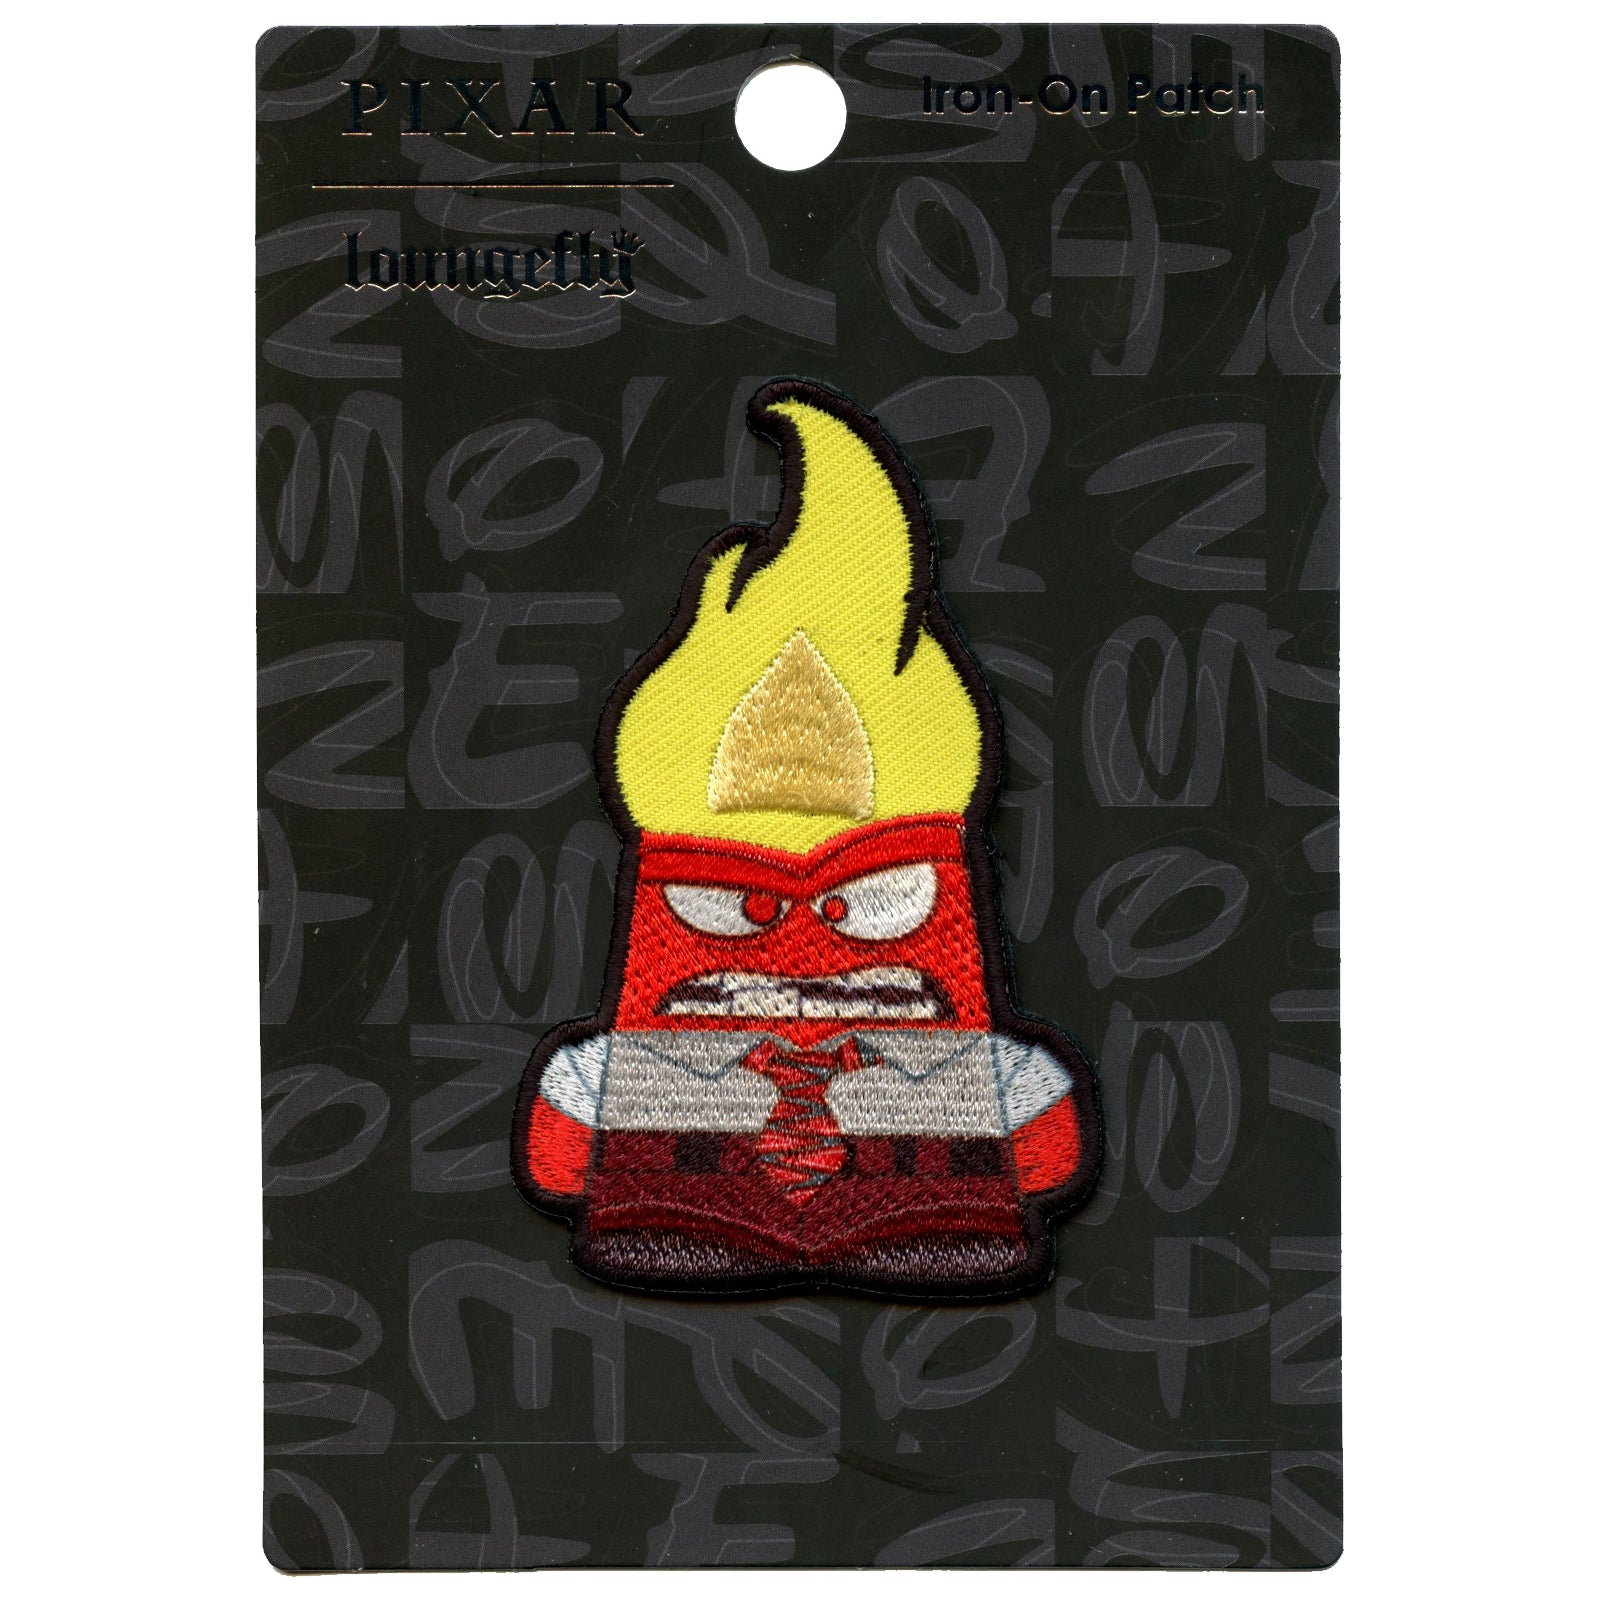 Official Disney's Inside Out Anger Embroidered Iron On Applique Patch 